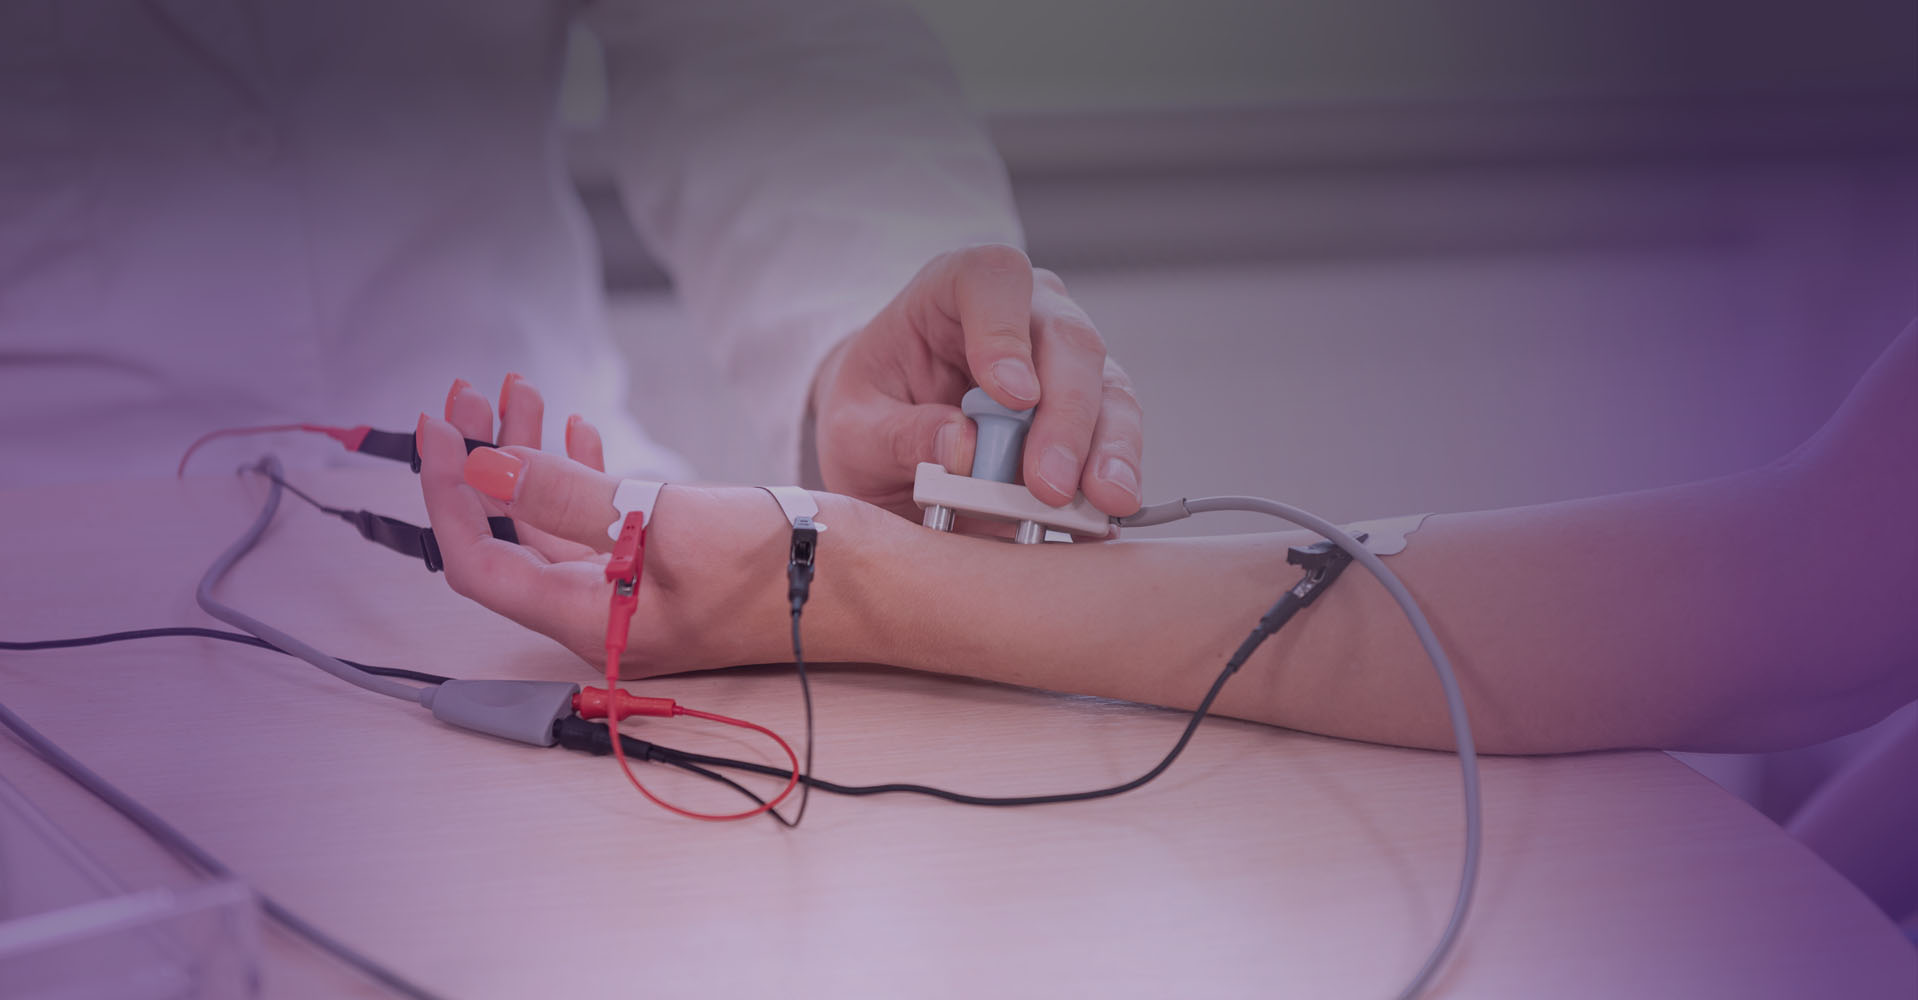 ELECTRONEUROMYOGRAFIC EXAMINATIONS  ARE MADE IN OUR CLINIC